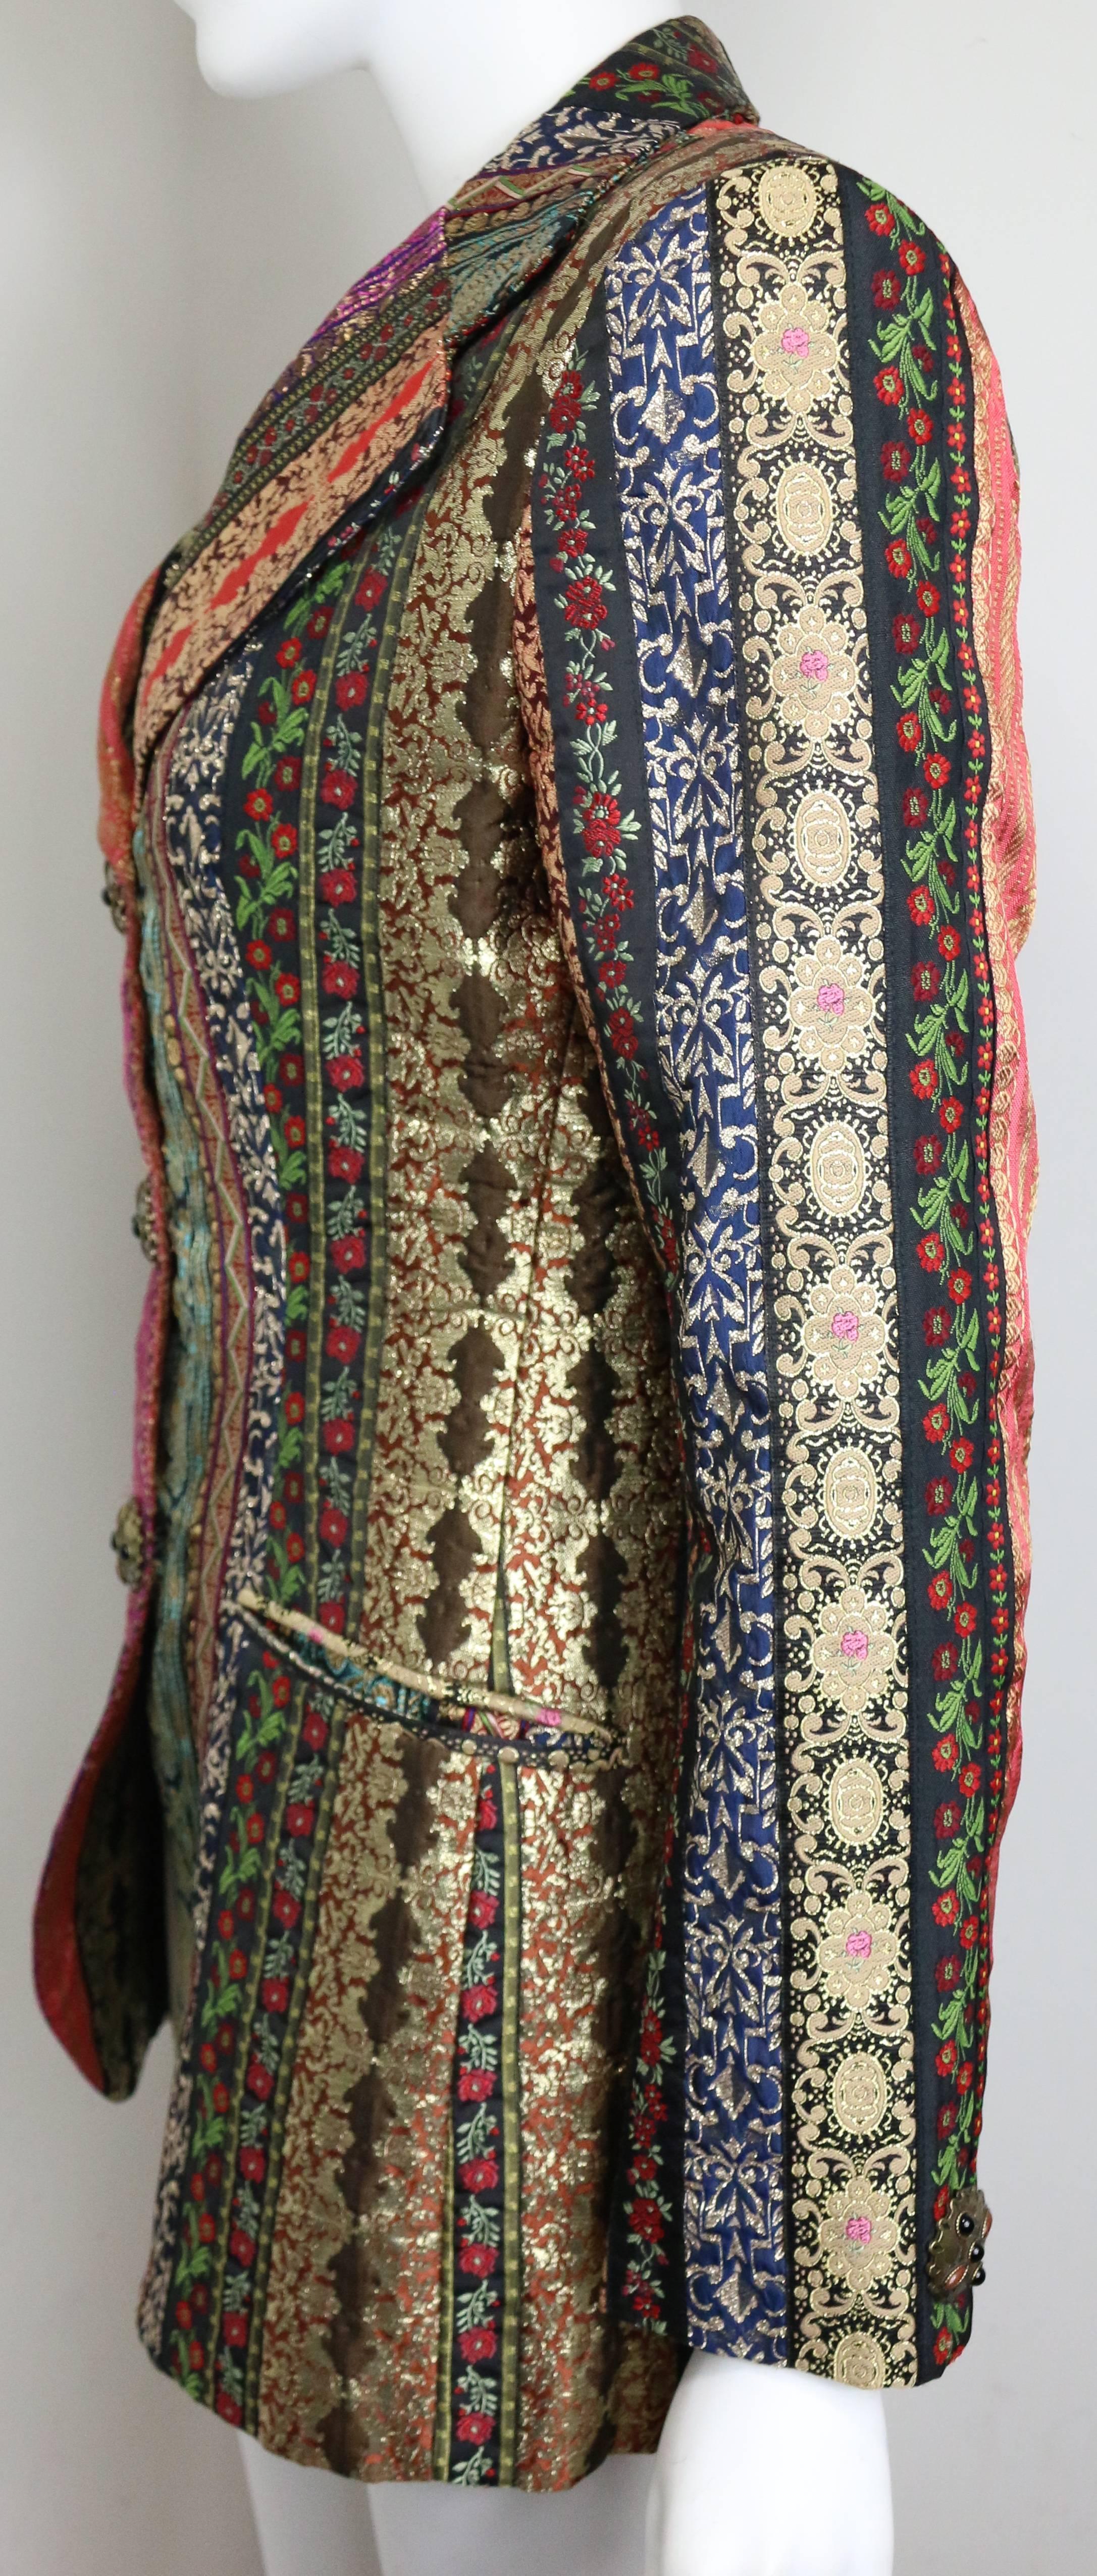 Dolce & Gabbana Multi Colour with Jacquard Patterns Embroidered Blazer For Sale 1